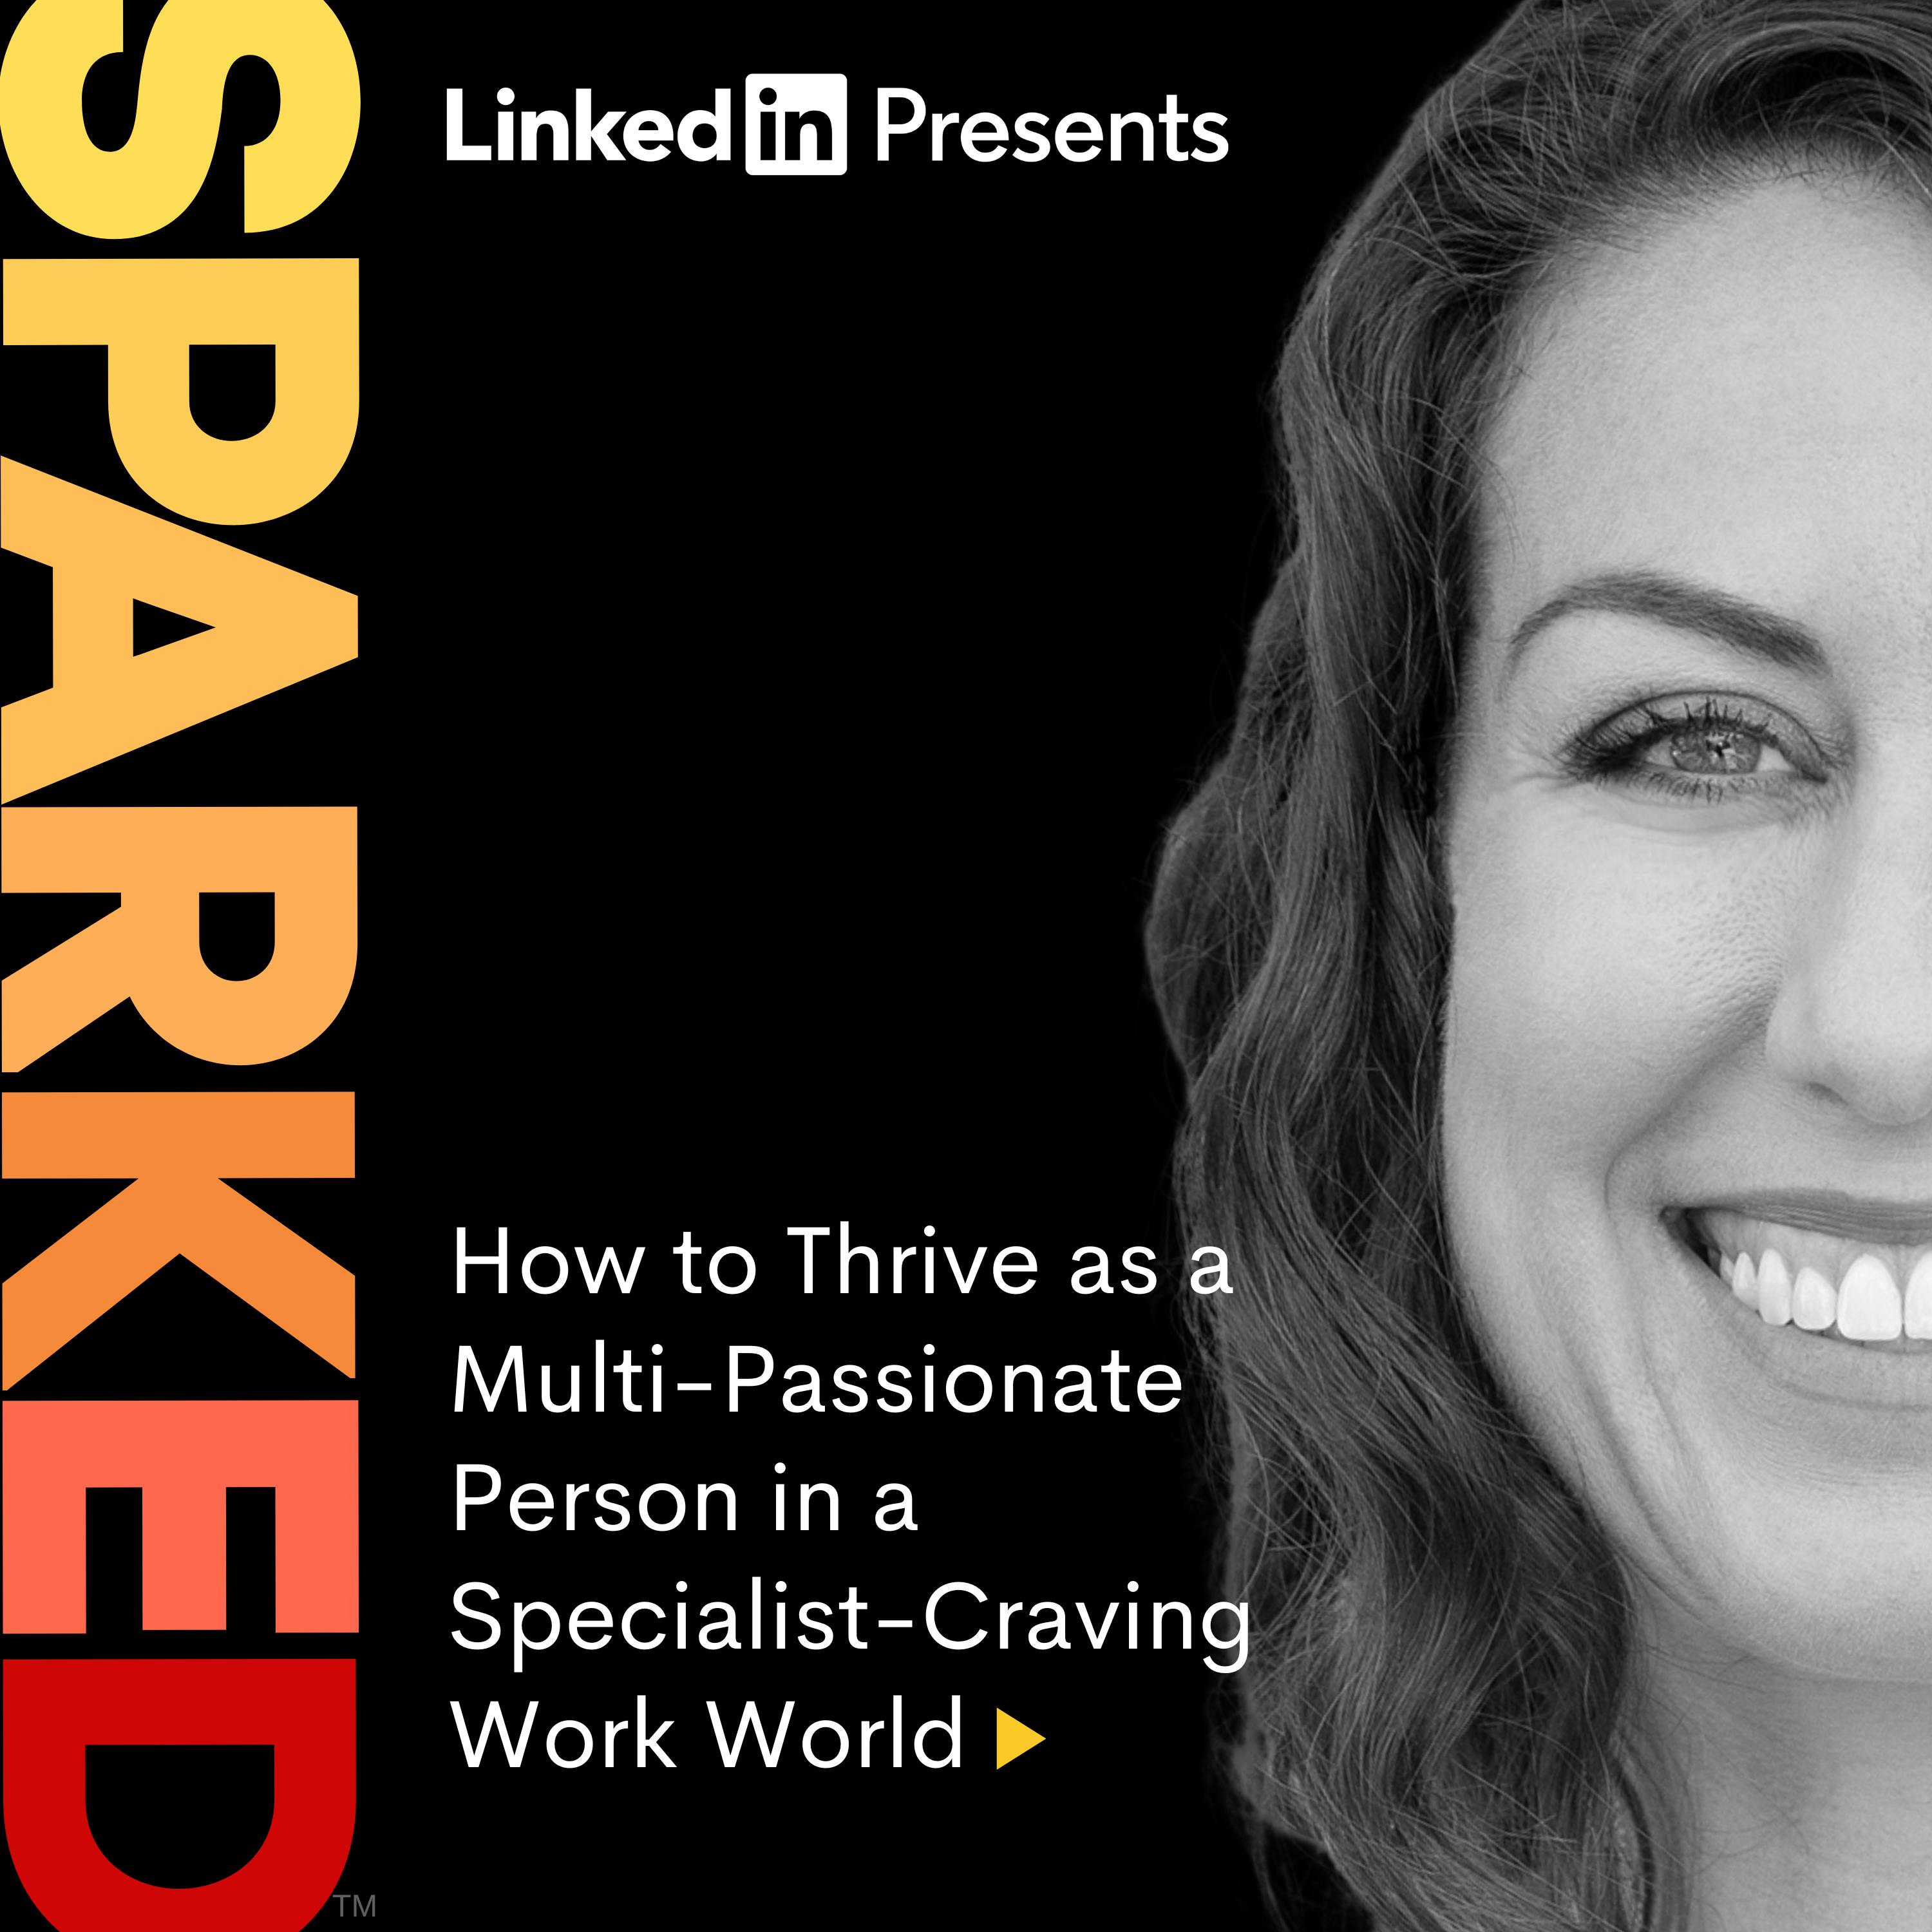 How to Thrive as a Multi-Passionate Person in a Specialist-Craving Work World Image